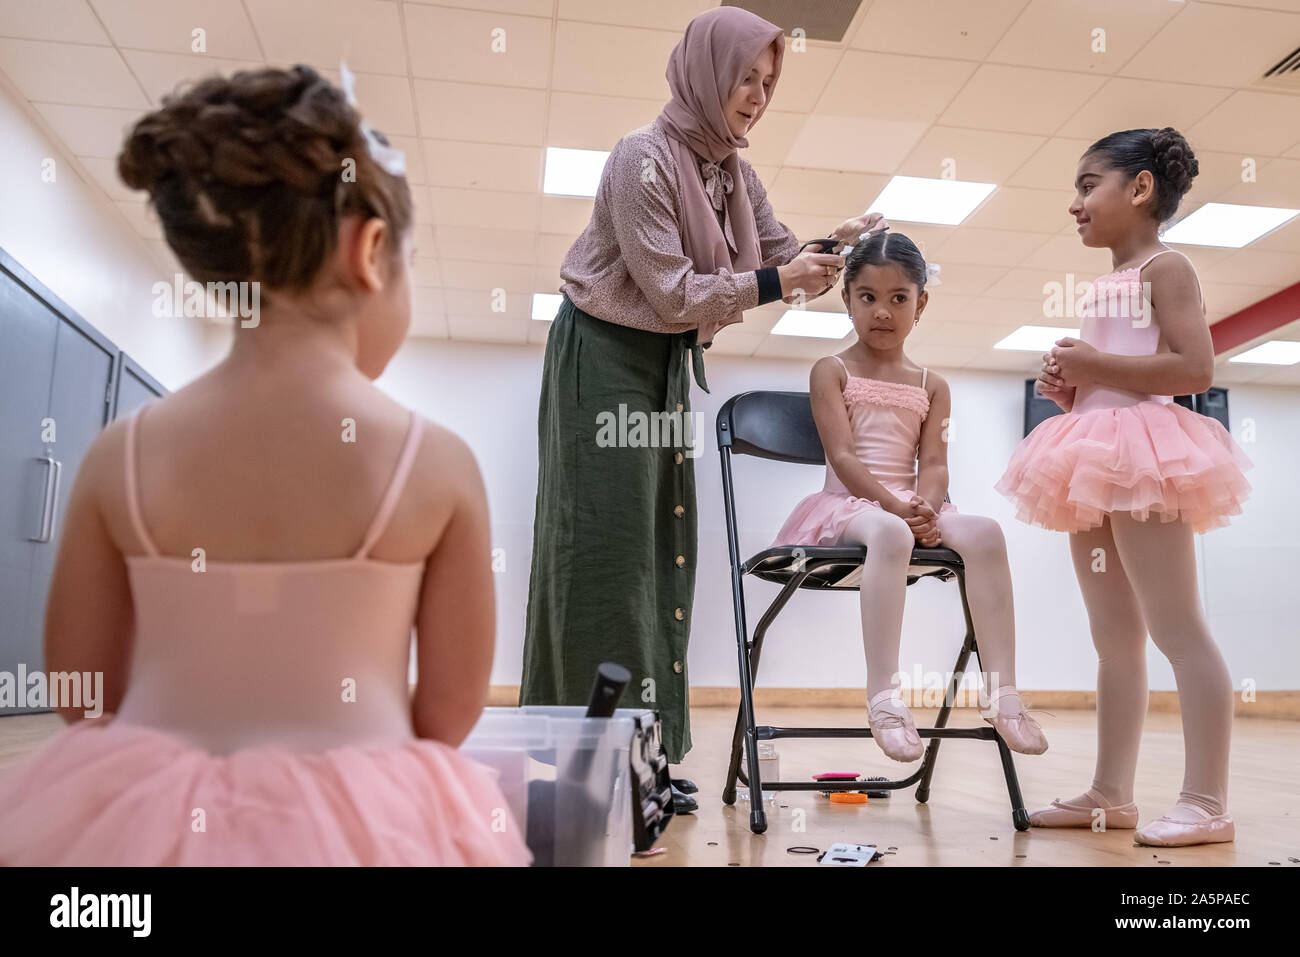 London, UK. 22nd Oct, 2019. World Ballet Day: Muslim Ballet School. Grace & Poise Academy. Founded in Jan 2019 by Maisie Alexandra Byers(pictured), a graduate of the Royal Academy of Dance and Dr Sajedah Shabib, business director, Grace & Poise Academy is the world’s first ballet school bringing ballet to the Muslim community.  Young dancers pictured: Marym 4yrs, Halimah 4yrs and Evi 5yrs Credit: Guy Corbishley/Alamy Live News Stock Photo